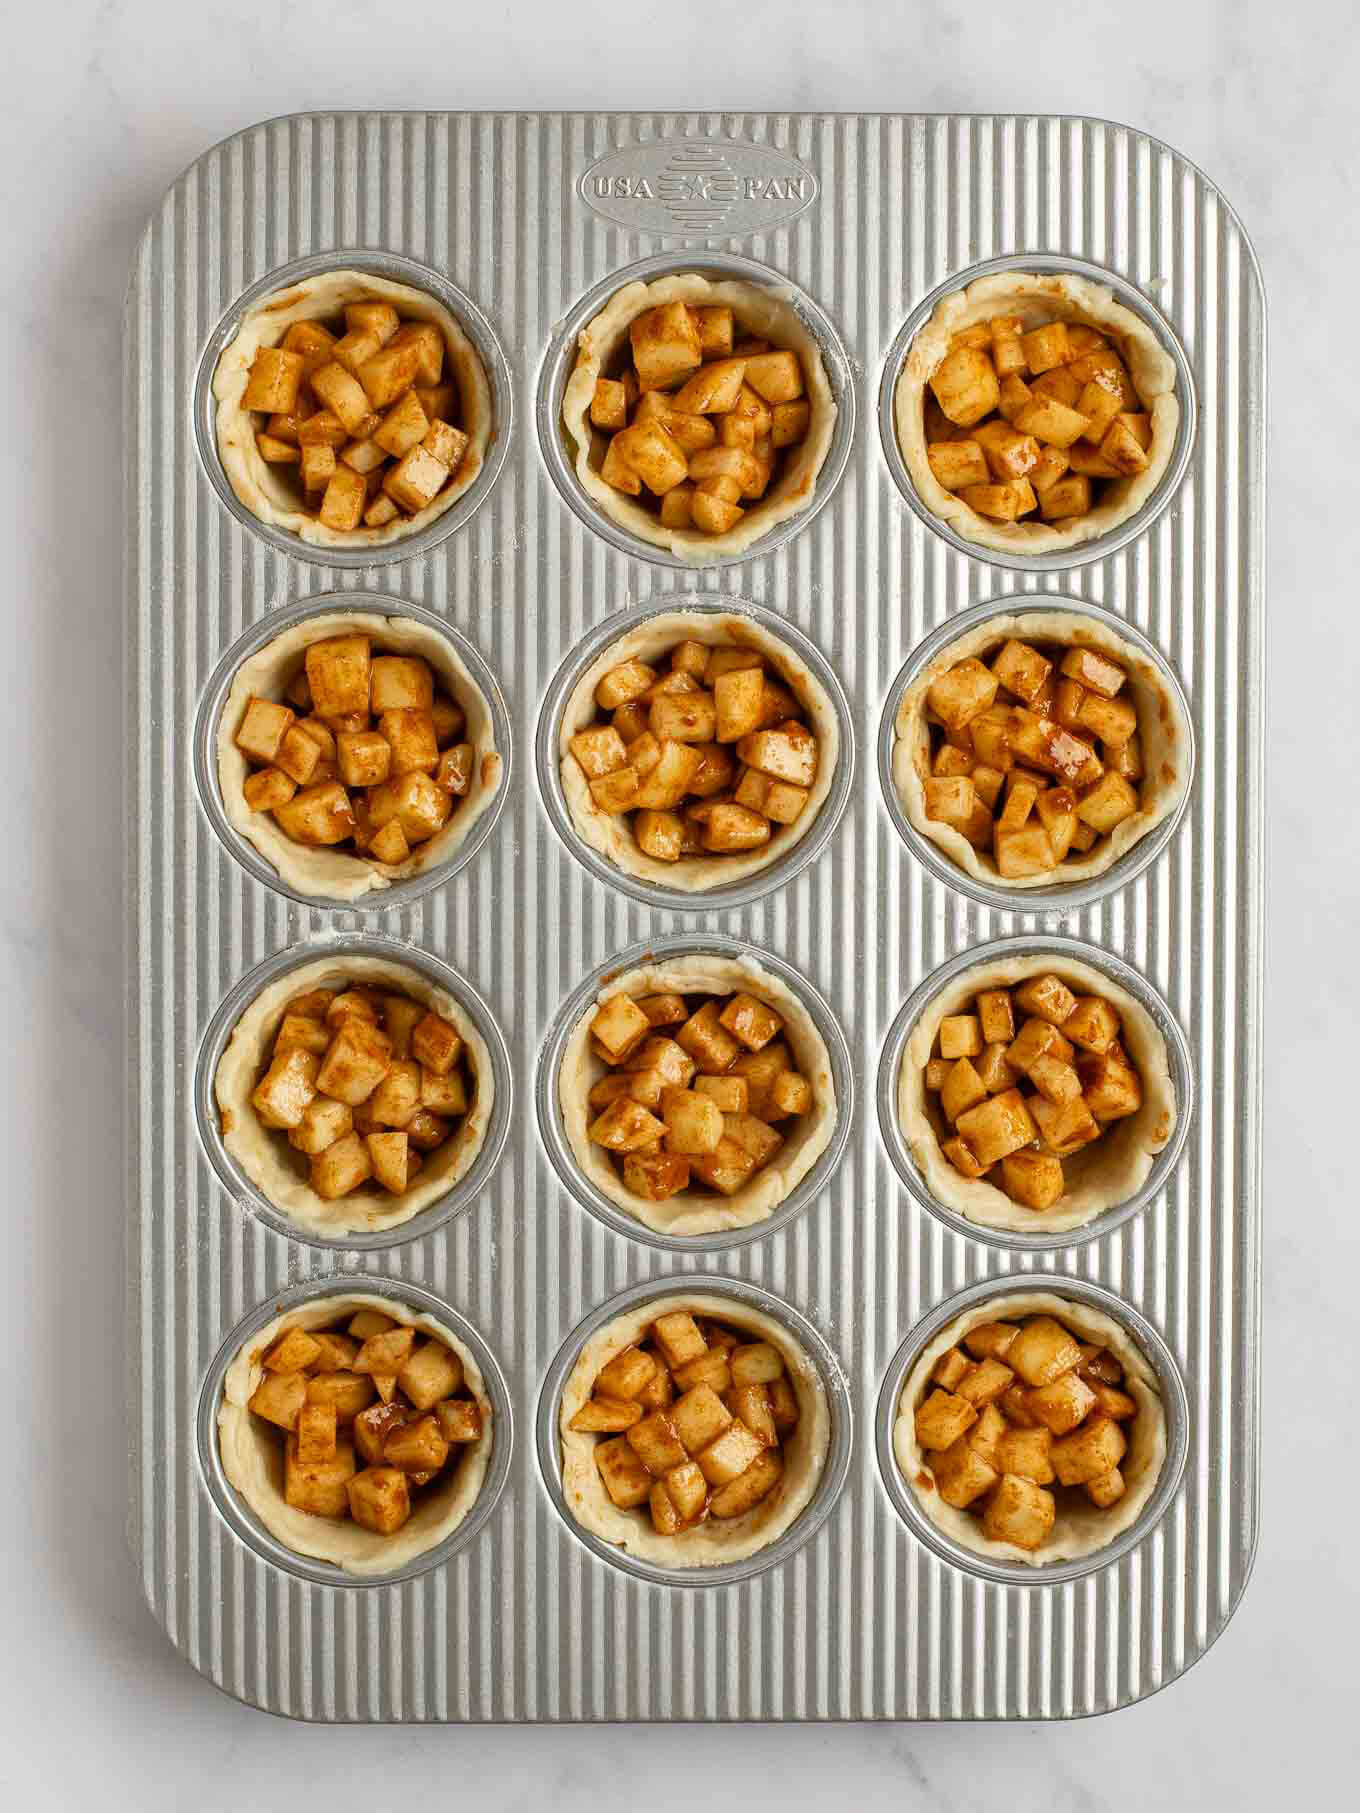 An overhead view of the apple pie filling evenly distributed between all of the pie crusts in a muffin pan.